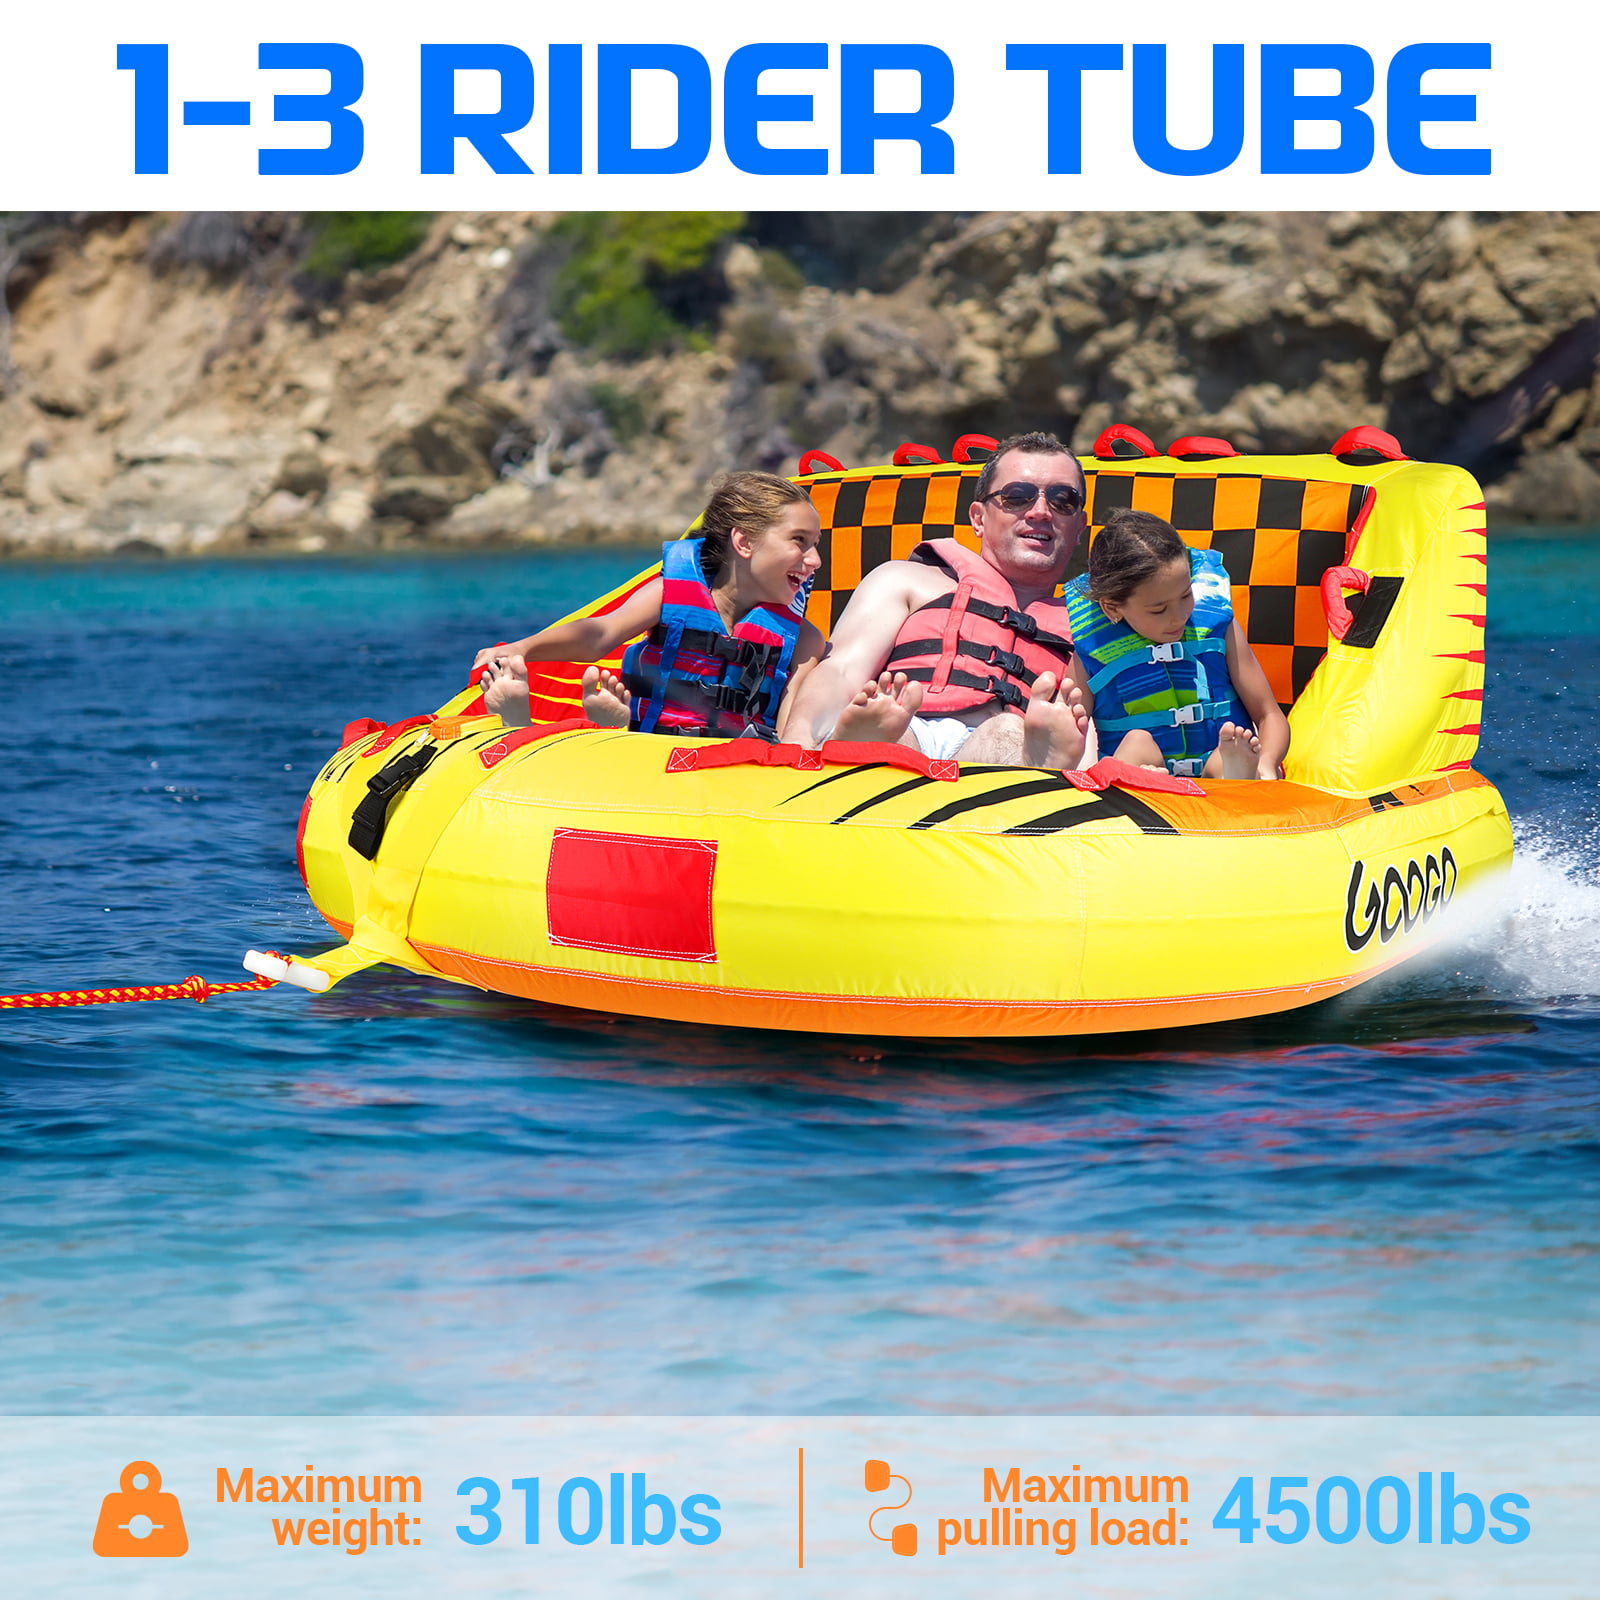 Inflatable Water Sports Towable Tube with EVA Foam Seat Pads Tow Rope for Kids Adults Dual Tow Points Speed Safety Valve GOOGO 2/3/4 Person Towable Tube for Boating PVC Bladder Grip Handles 